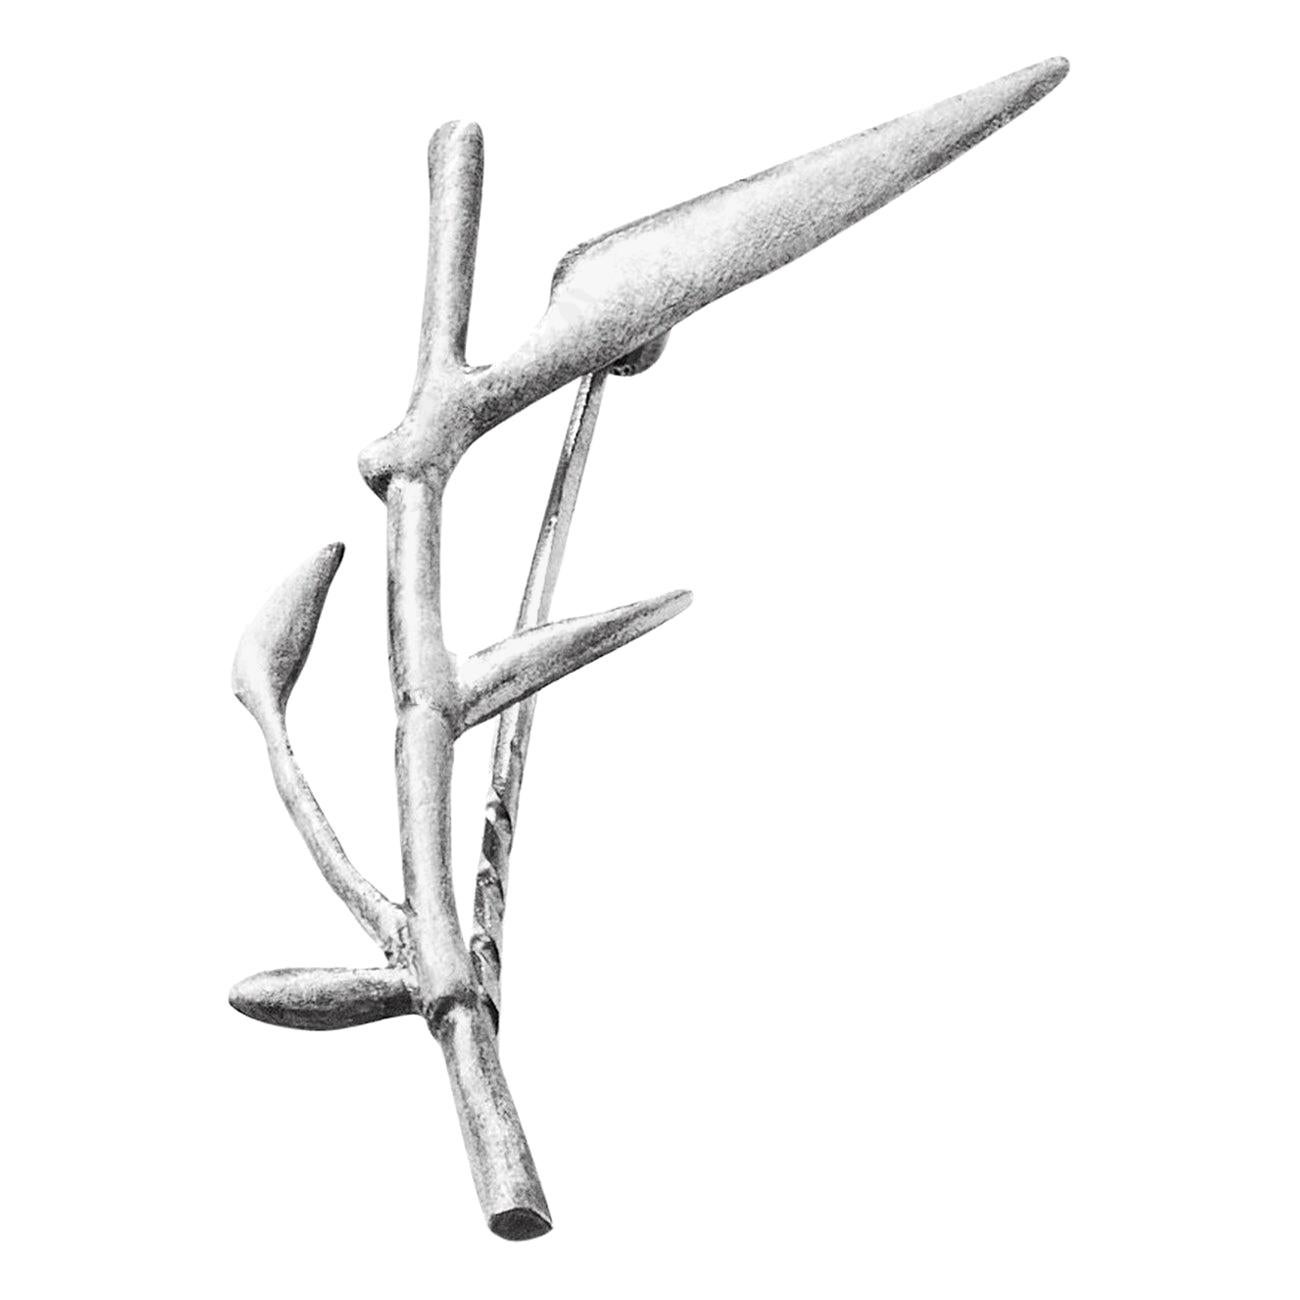 Wabi-Sabi Contemporary Bamboo Brooch in Silver N3 by the Artist, Feat. in Vogue